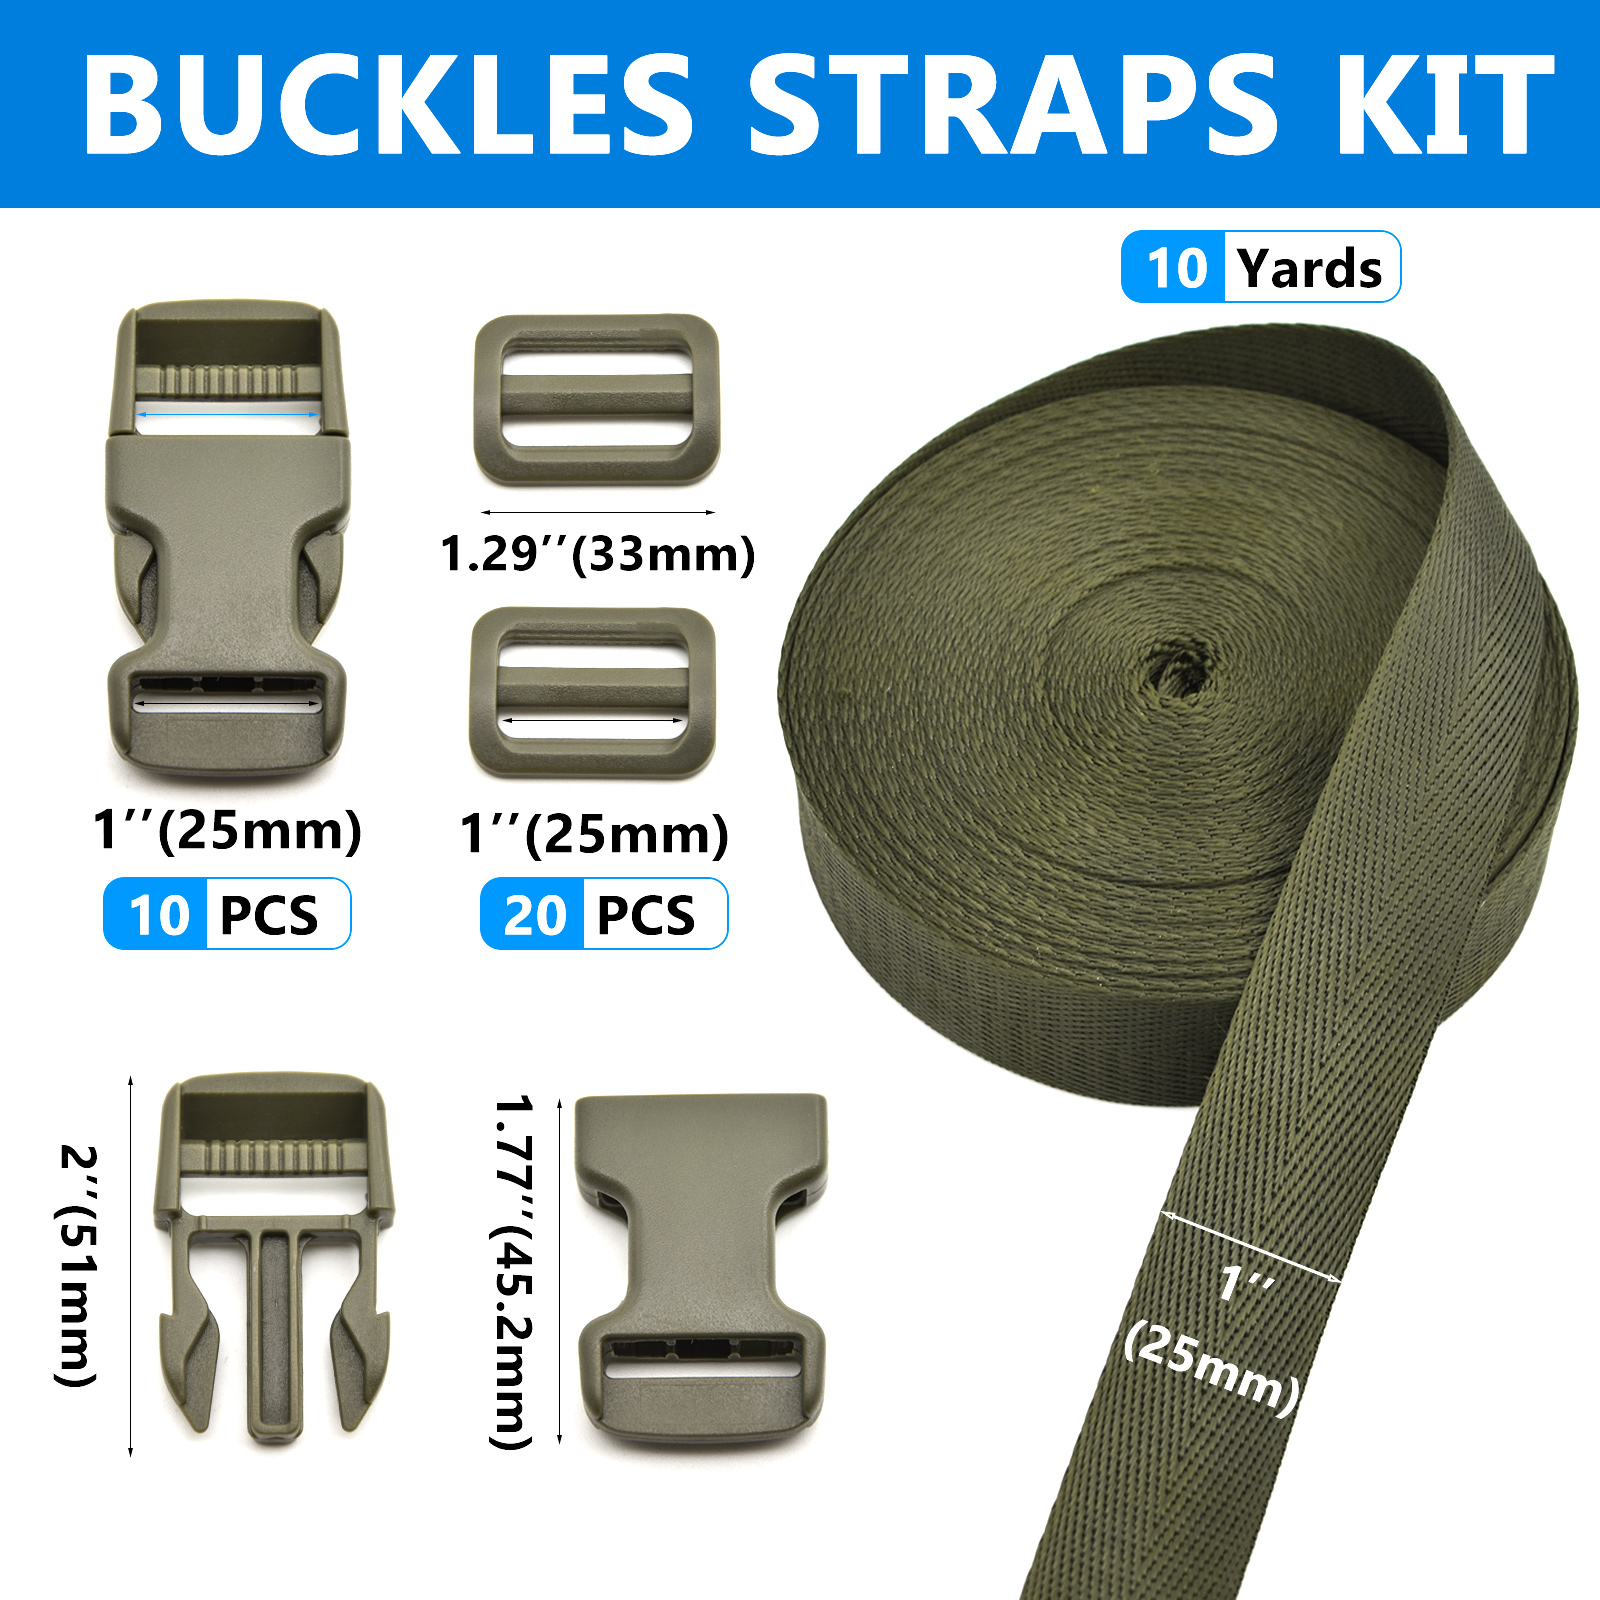 1 inch Buckles Straps Set with 10 Yards Nylon Webbing Strap,10 pcs Quick  Side Release Plastic Buckle, 20 pcs Tri-glide Slide Clip for Luggage Strap,  Backpack Replacement (Army Green) 